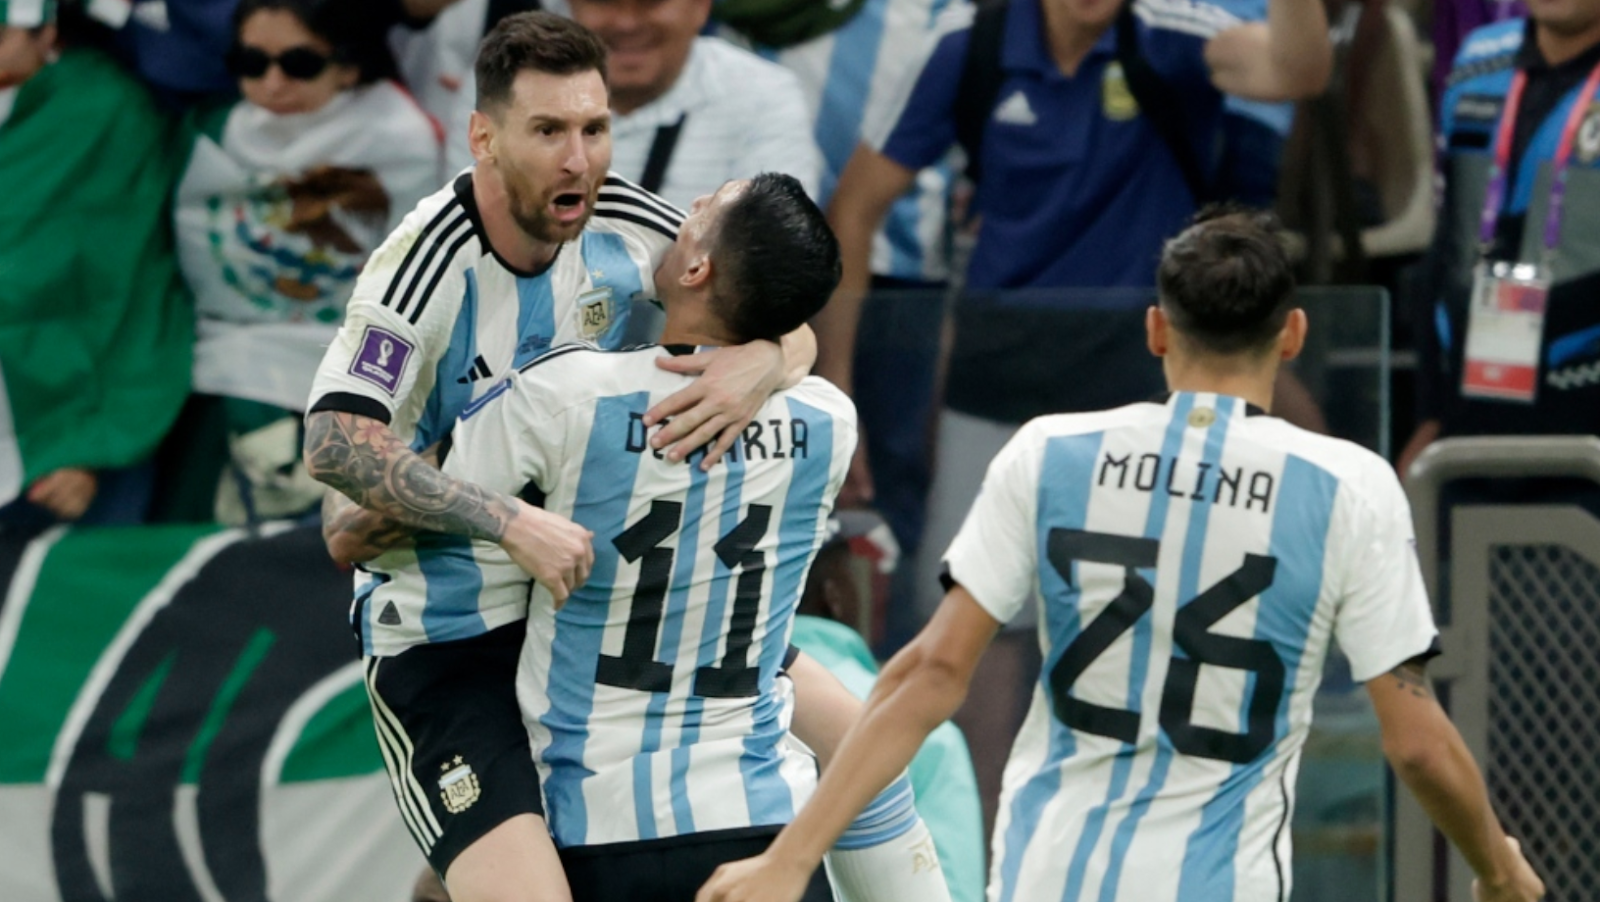 Argentina vs Australia, December 3: Head-to-Head Statistics, Line-ups, Prediction for the 2022 World Cup Match